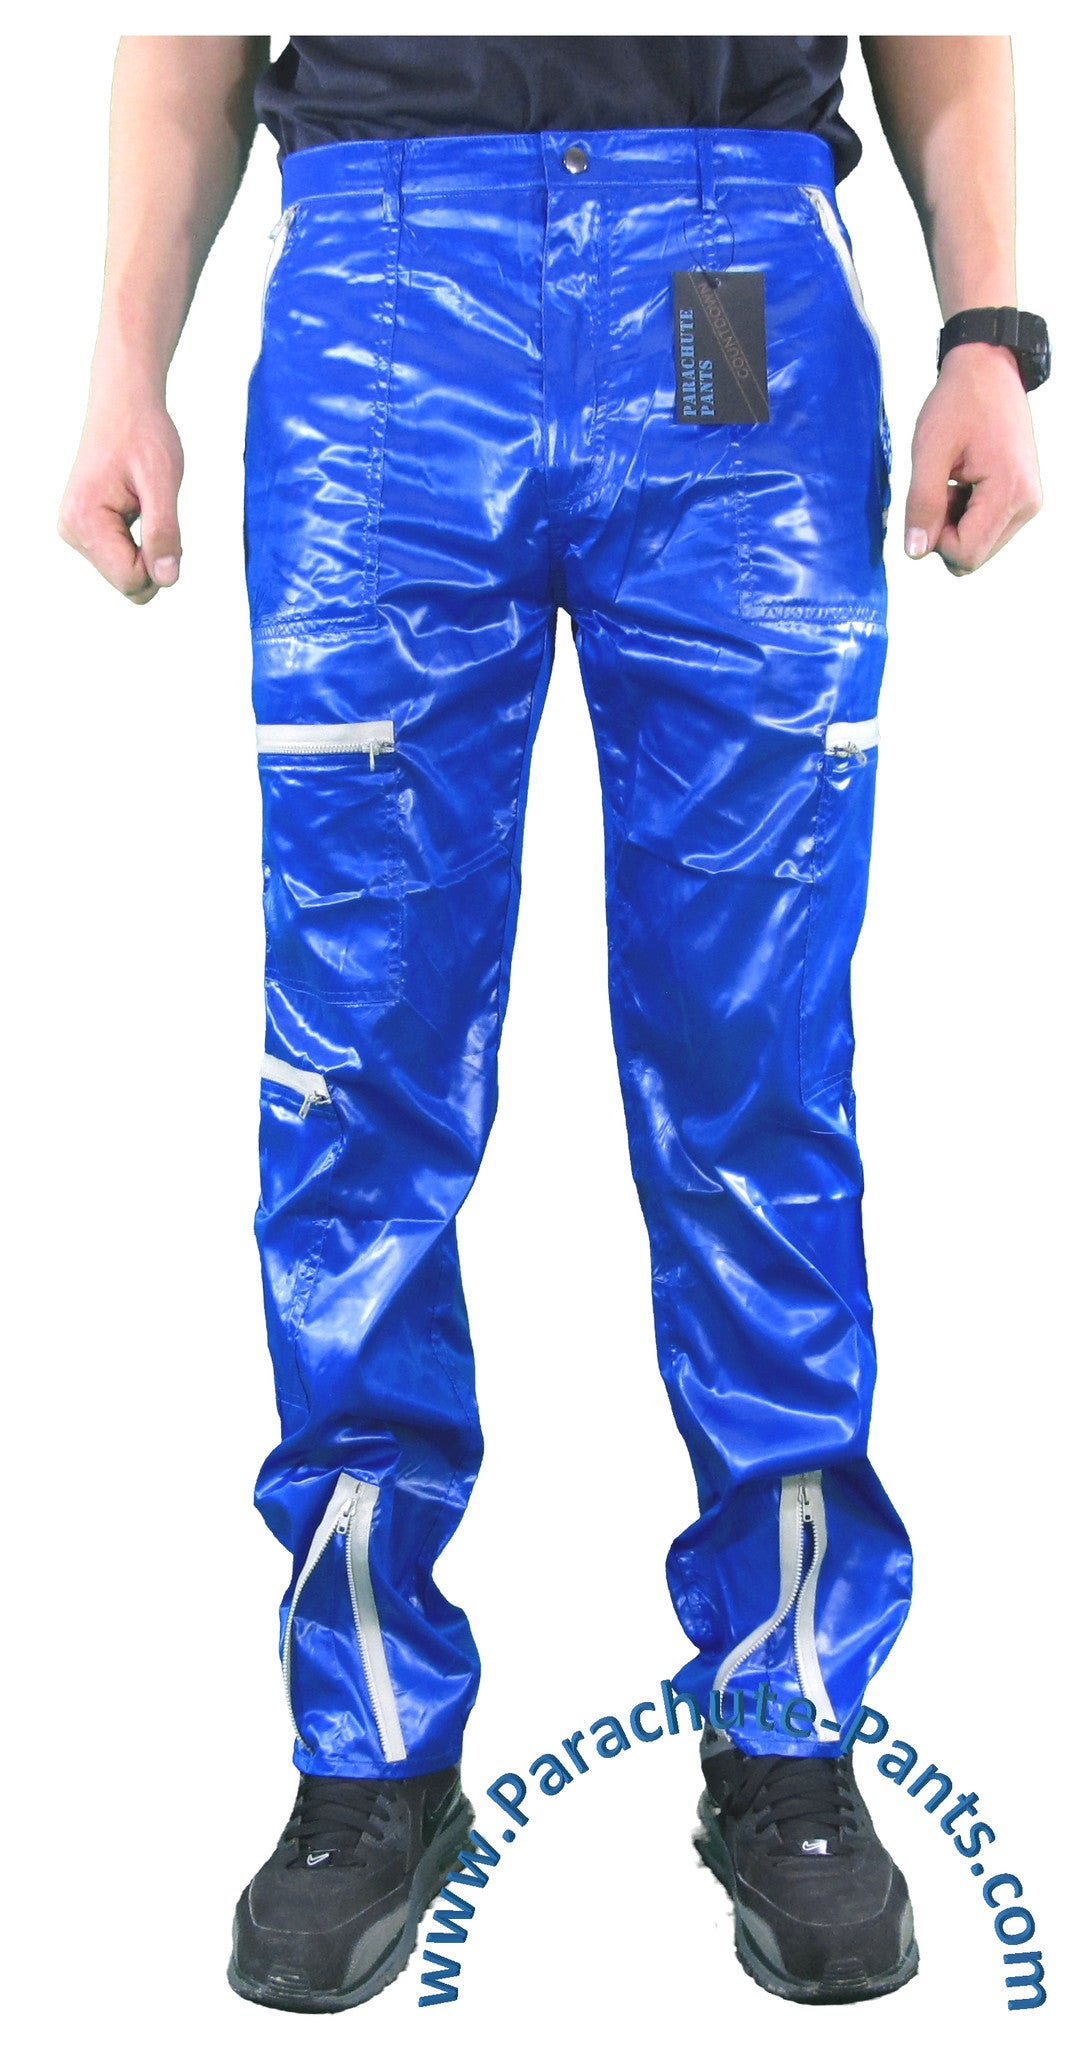 Countdown Blue Shiny Nylon Parachute Pants with Grey Zippers | The ...